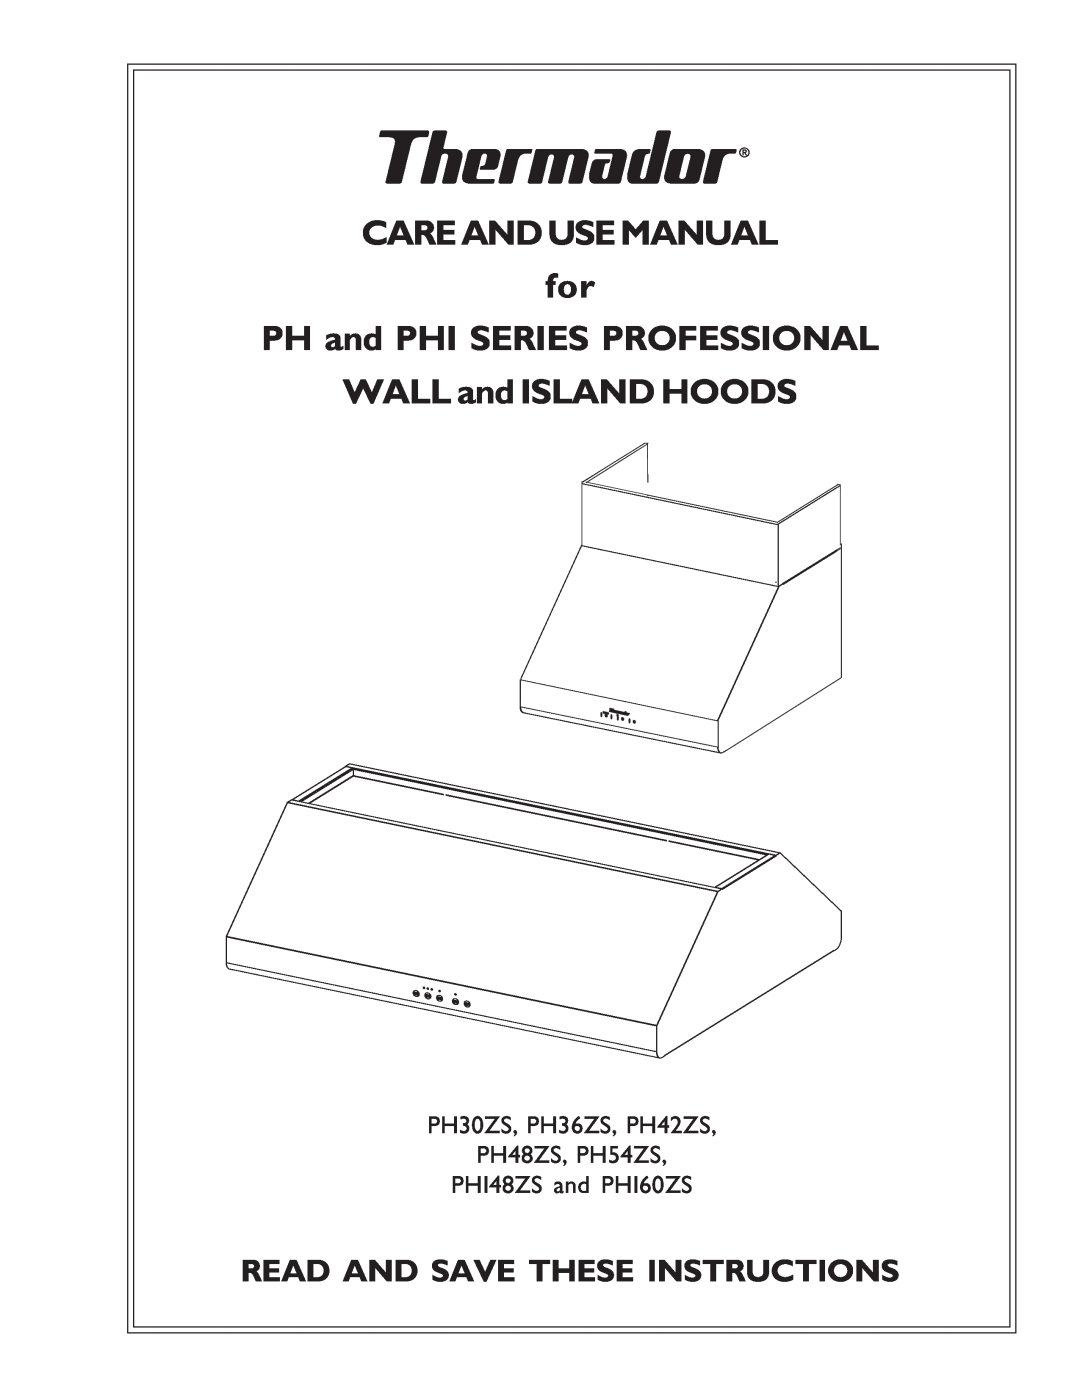 Thermador PH30ZS, PH36ZS, PH42ZS, PH48ZS, PH54ZS, PHI48ZS, PHI60ZS manual Read And Save These Instructions 